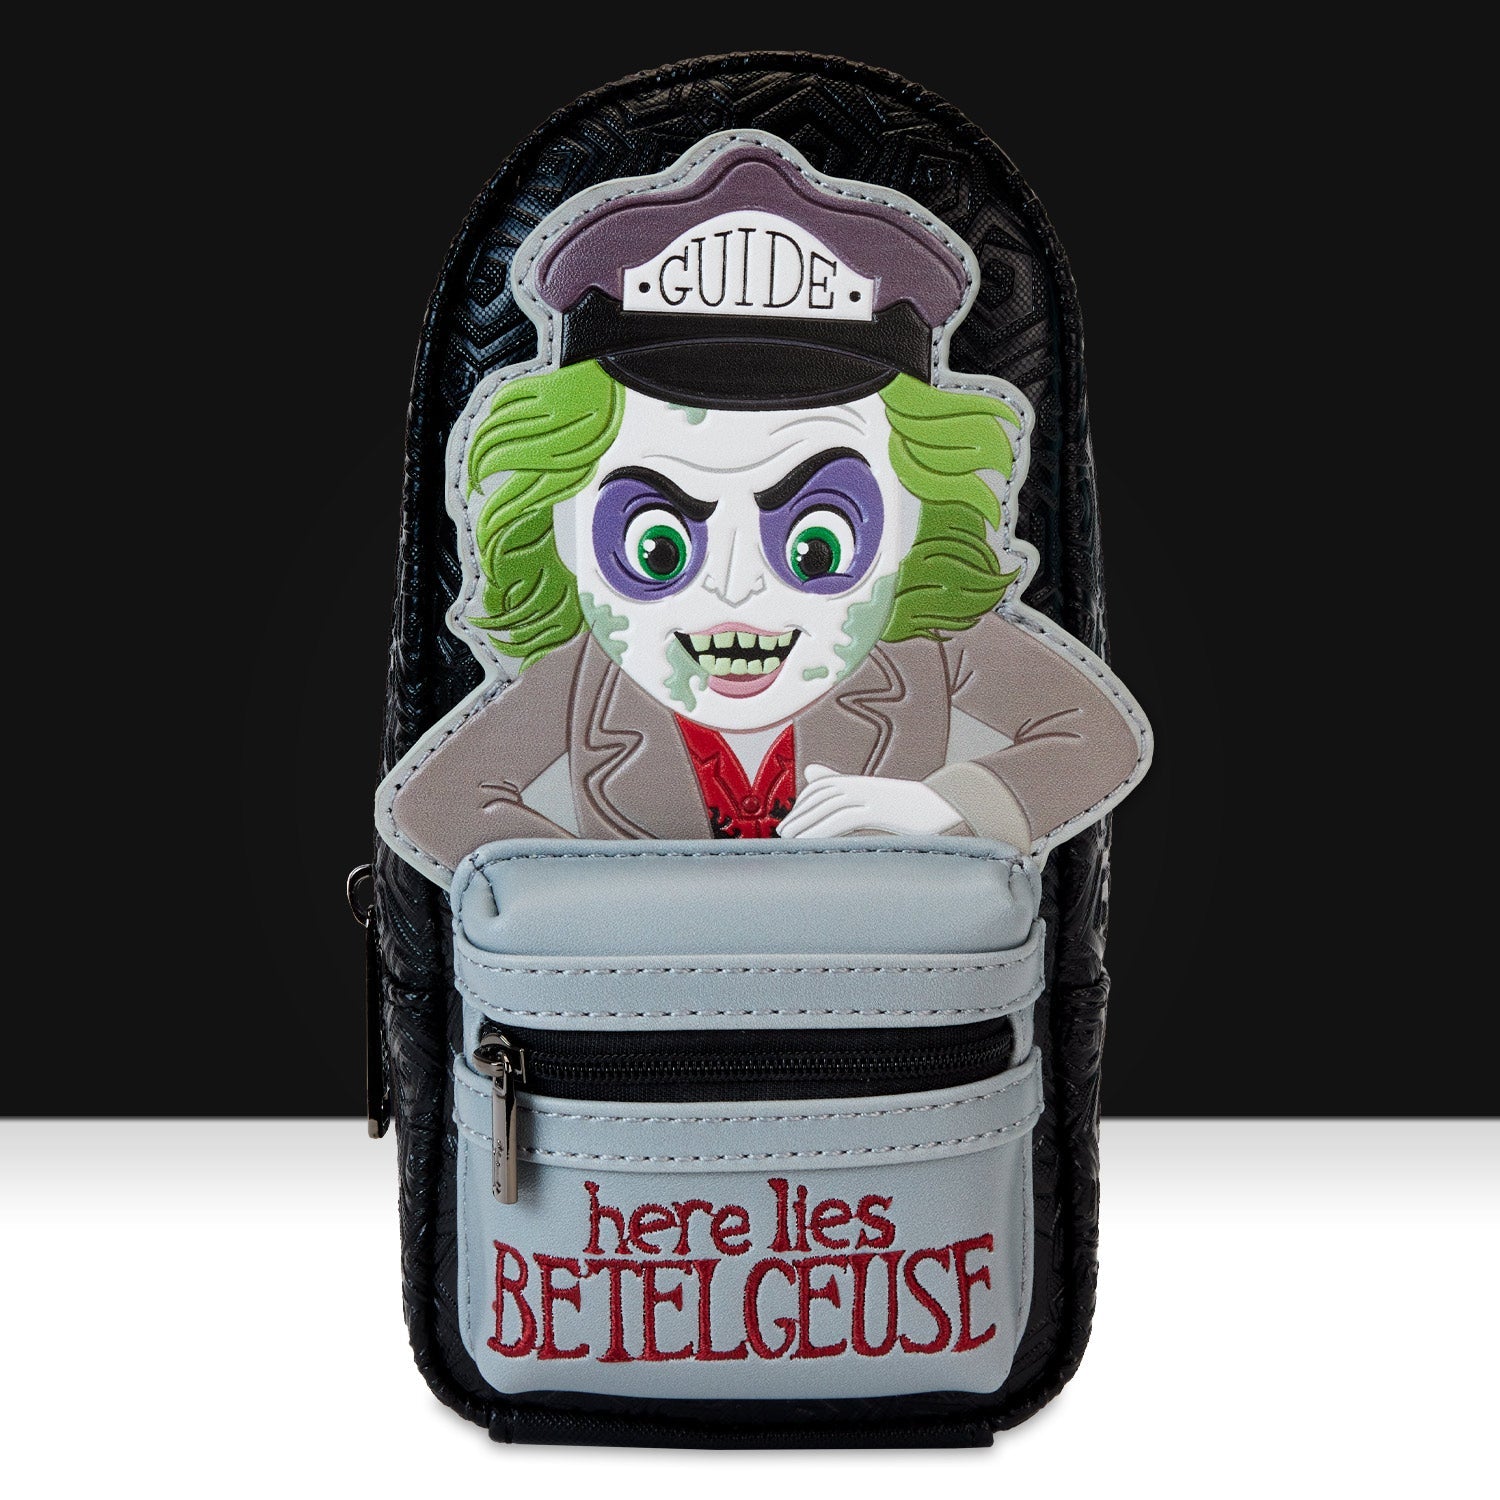 Loungefly x Beetlejuice Here Lies Betelgeuse Mini Backpack Pencil Case - GeekCore